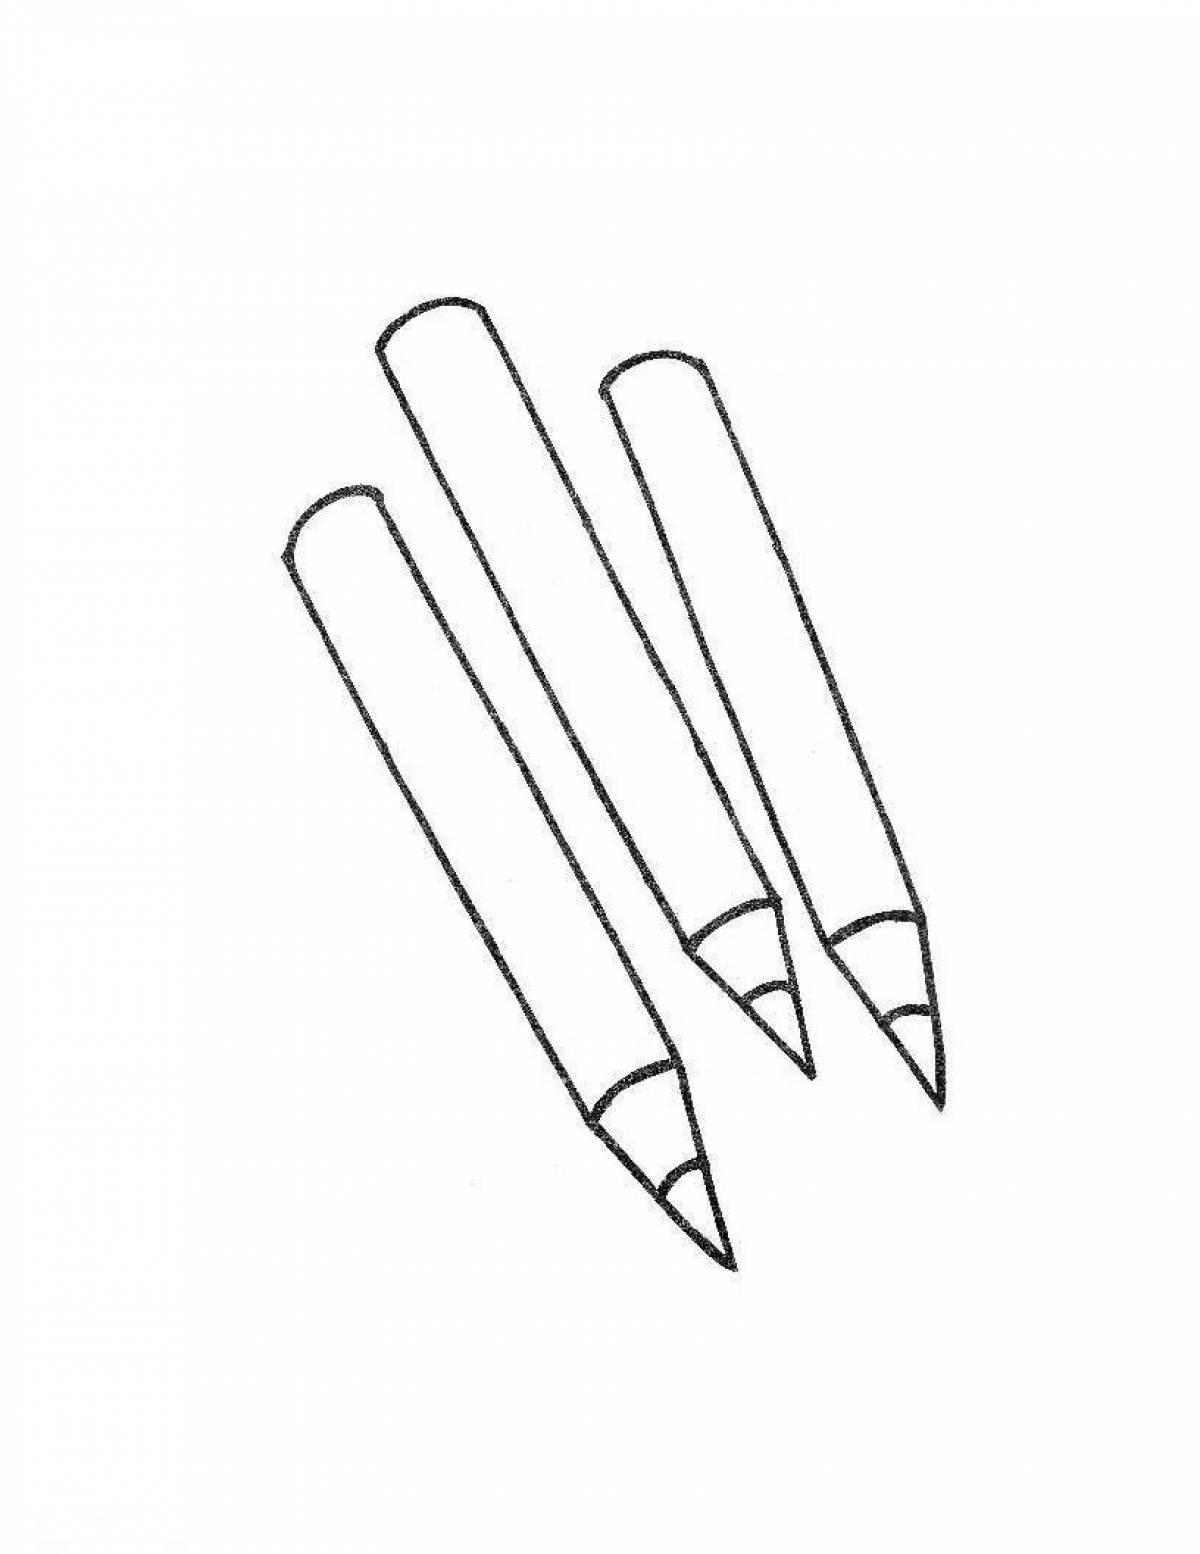 Color-blasted 2 pencils dot ru coloring page